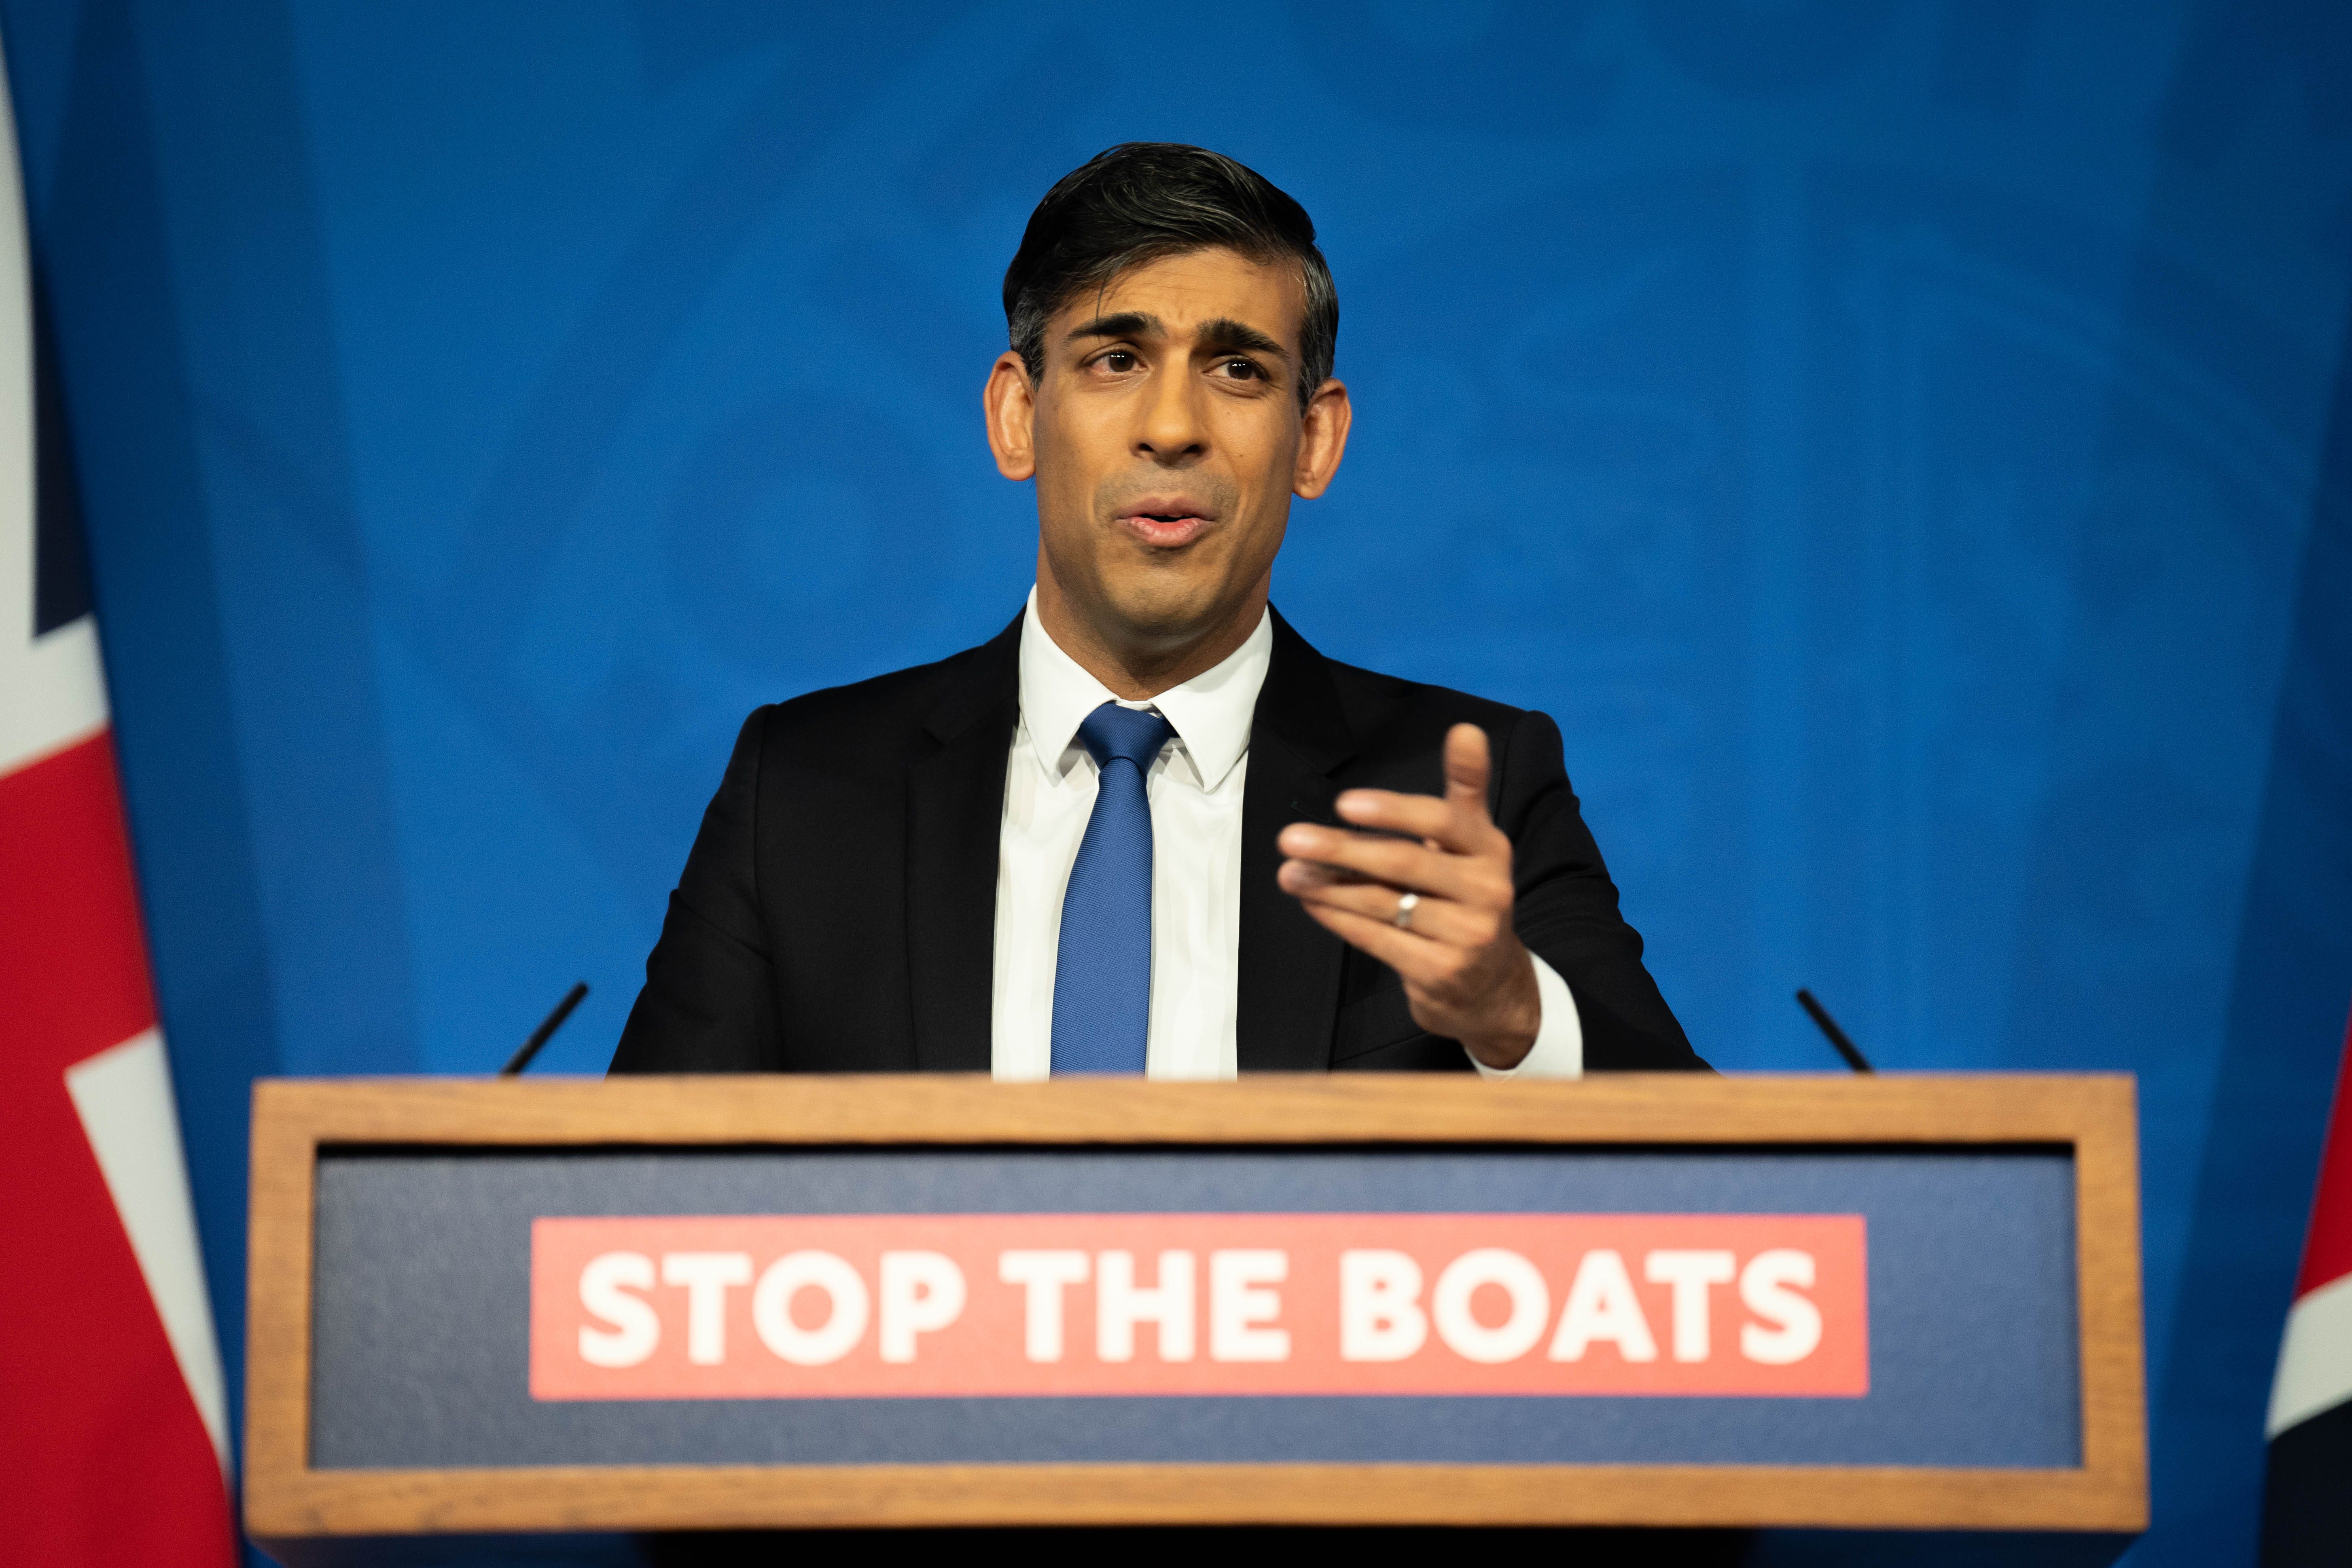 A ‘super-rational but politically inept’ Rishi Sunak promised to ‘stop the boats’, not reduce them